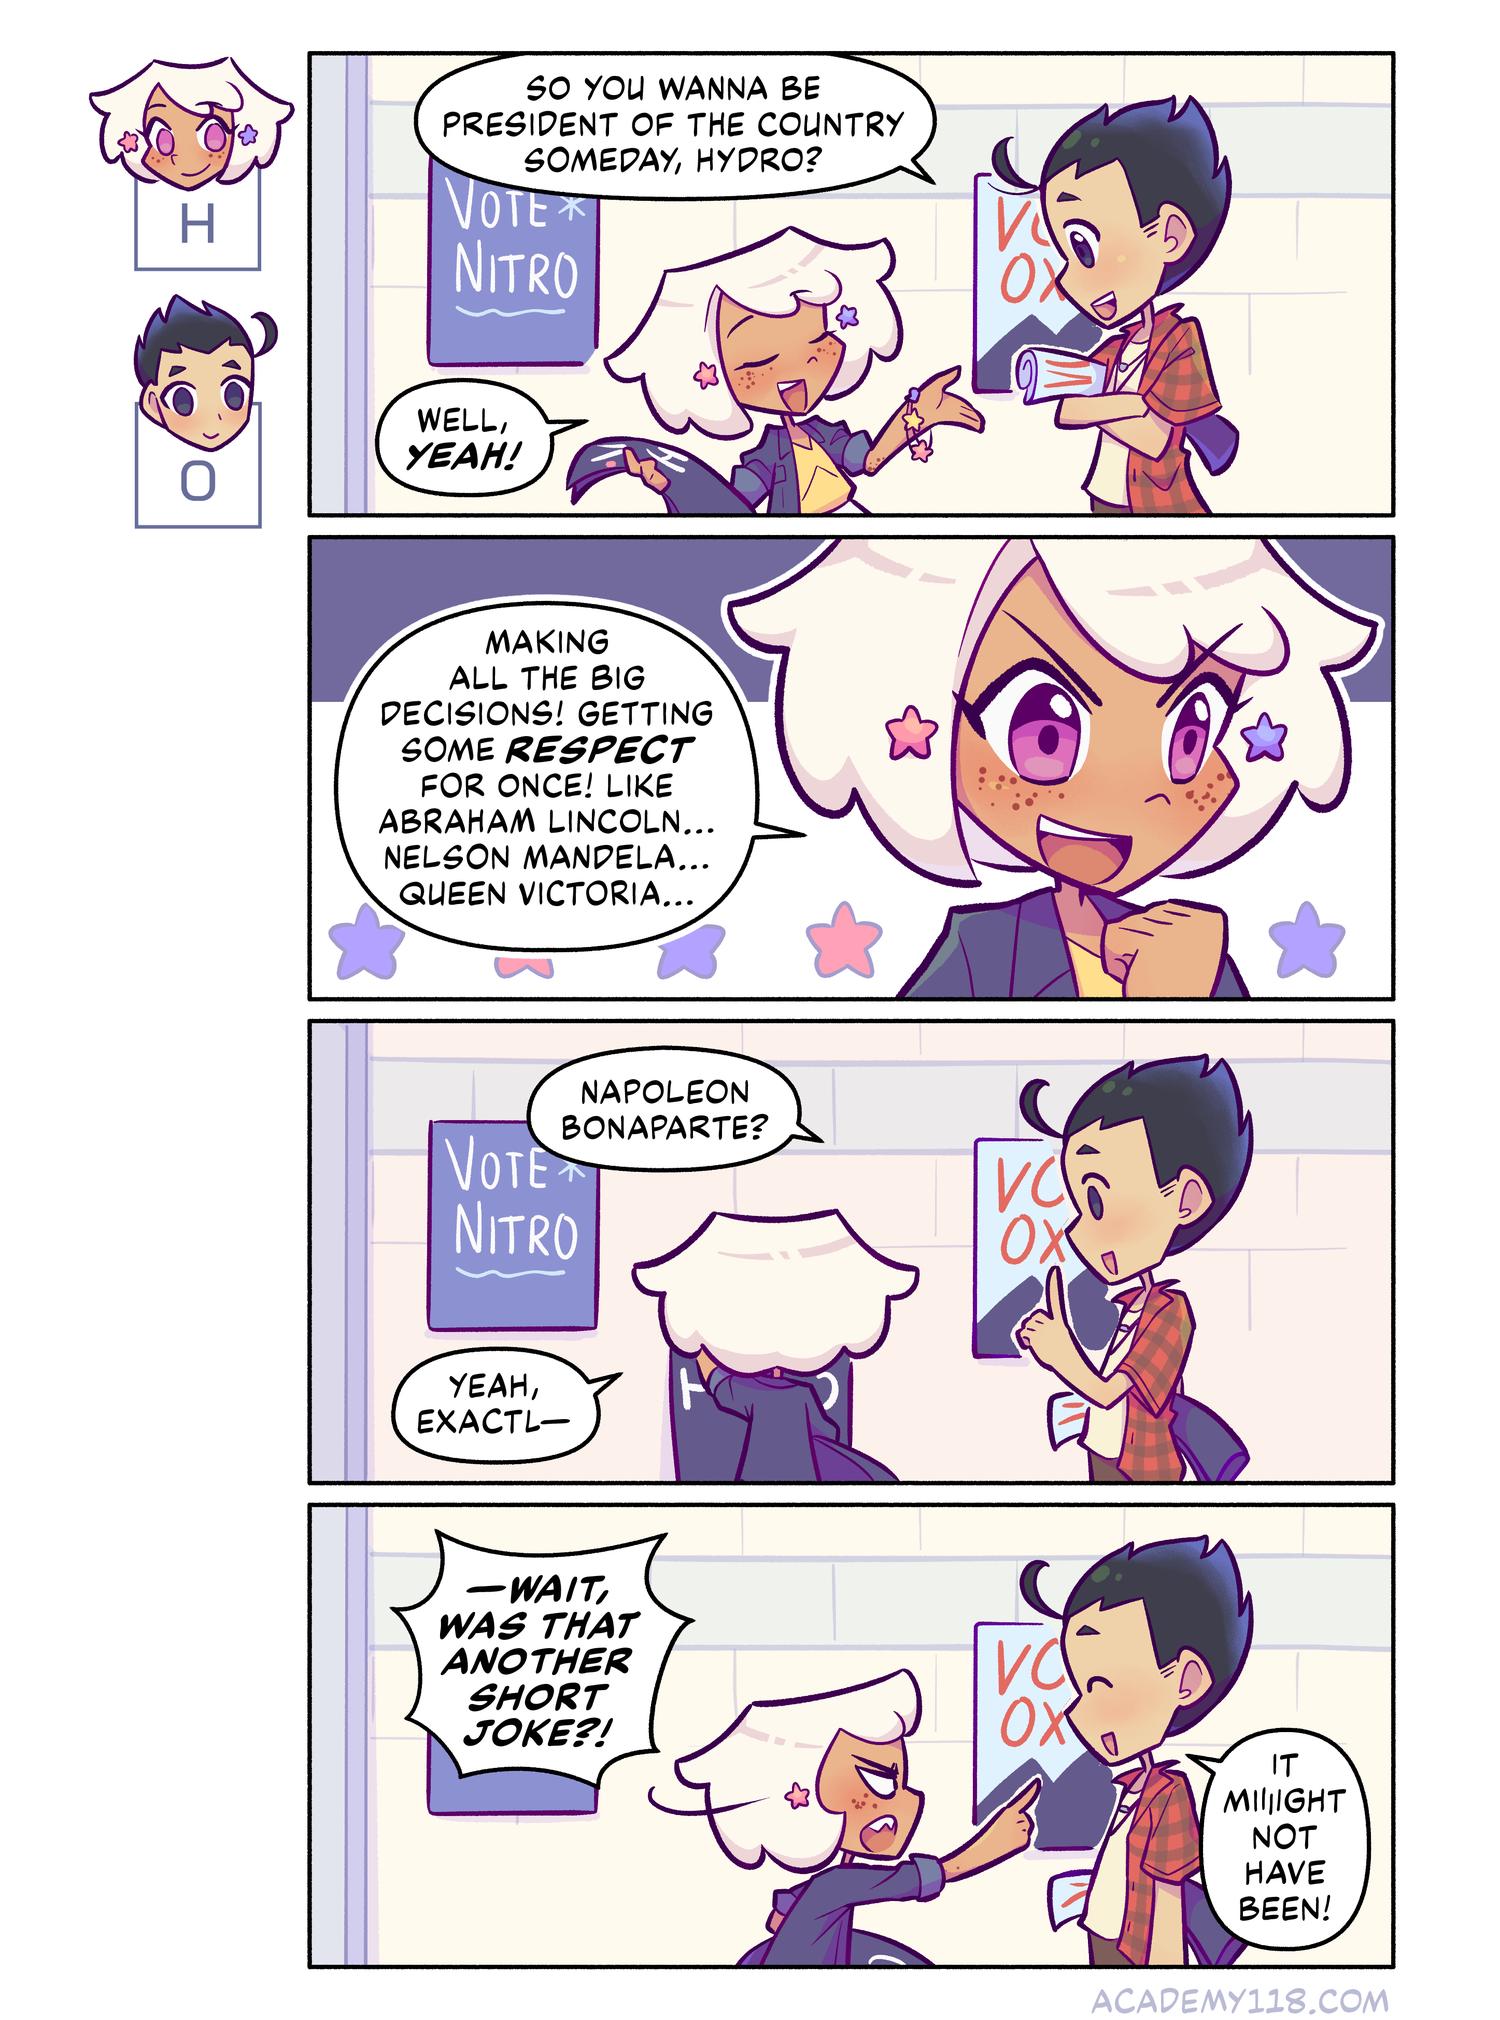 Hydrogen for President comic page 12